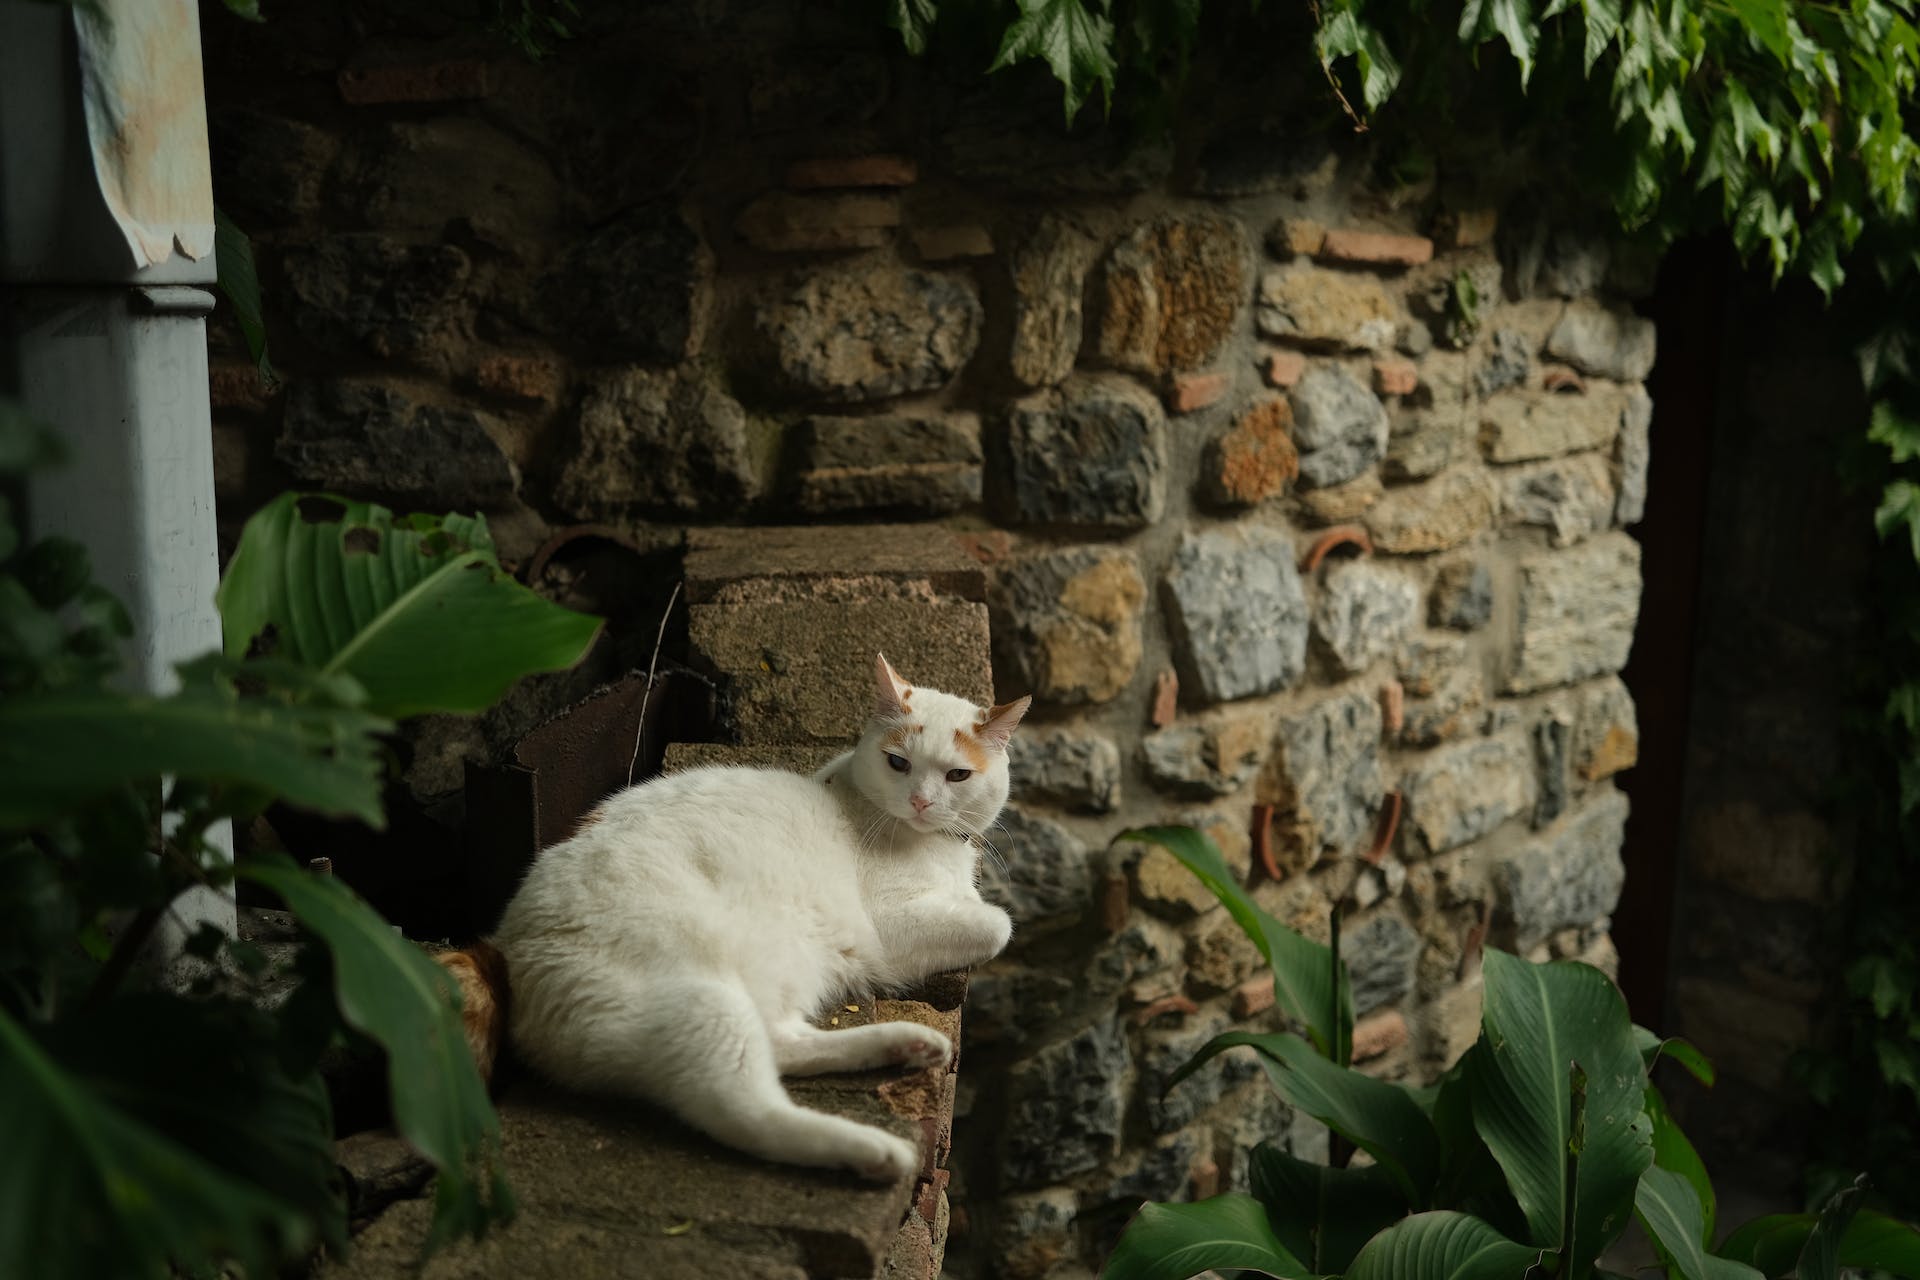 A cat sitting on a brick wall in a garden